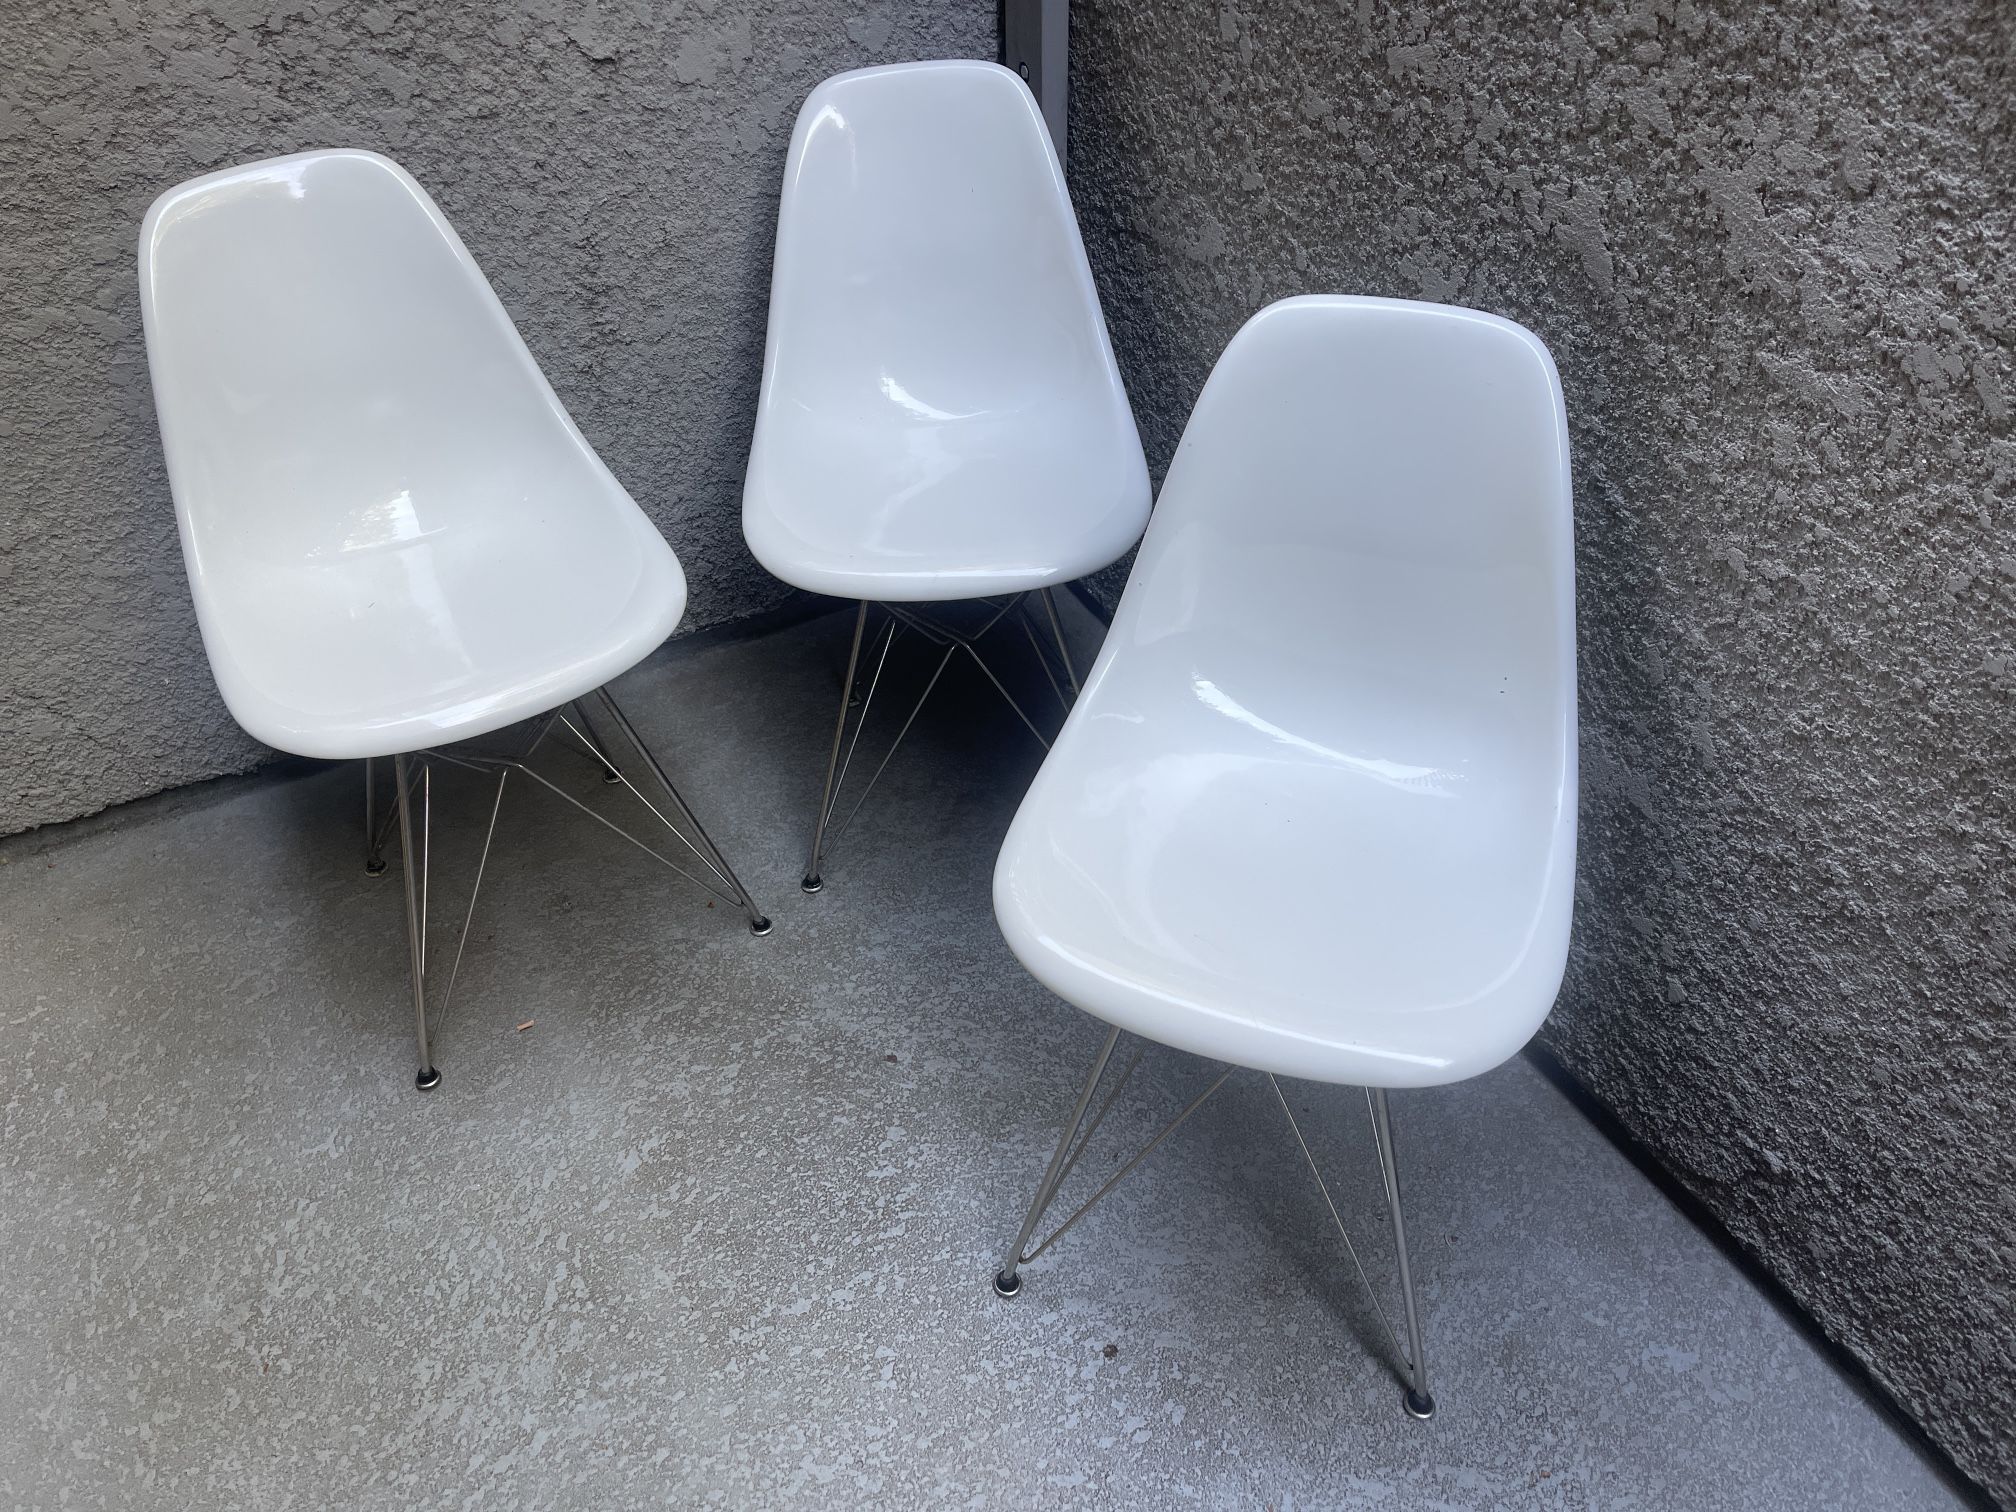 Nice Patio Chairs. Im Moving. All 3 For $75